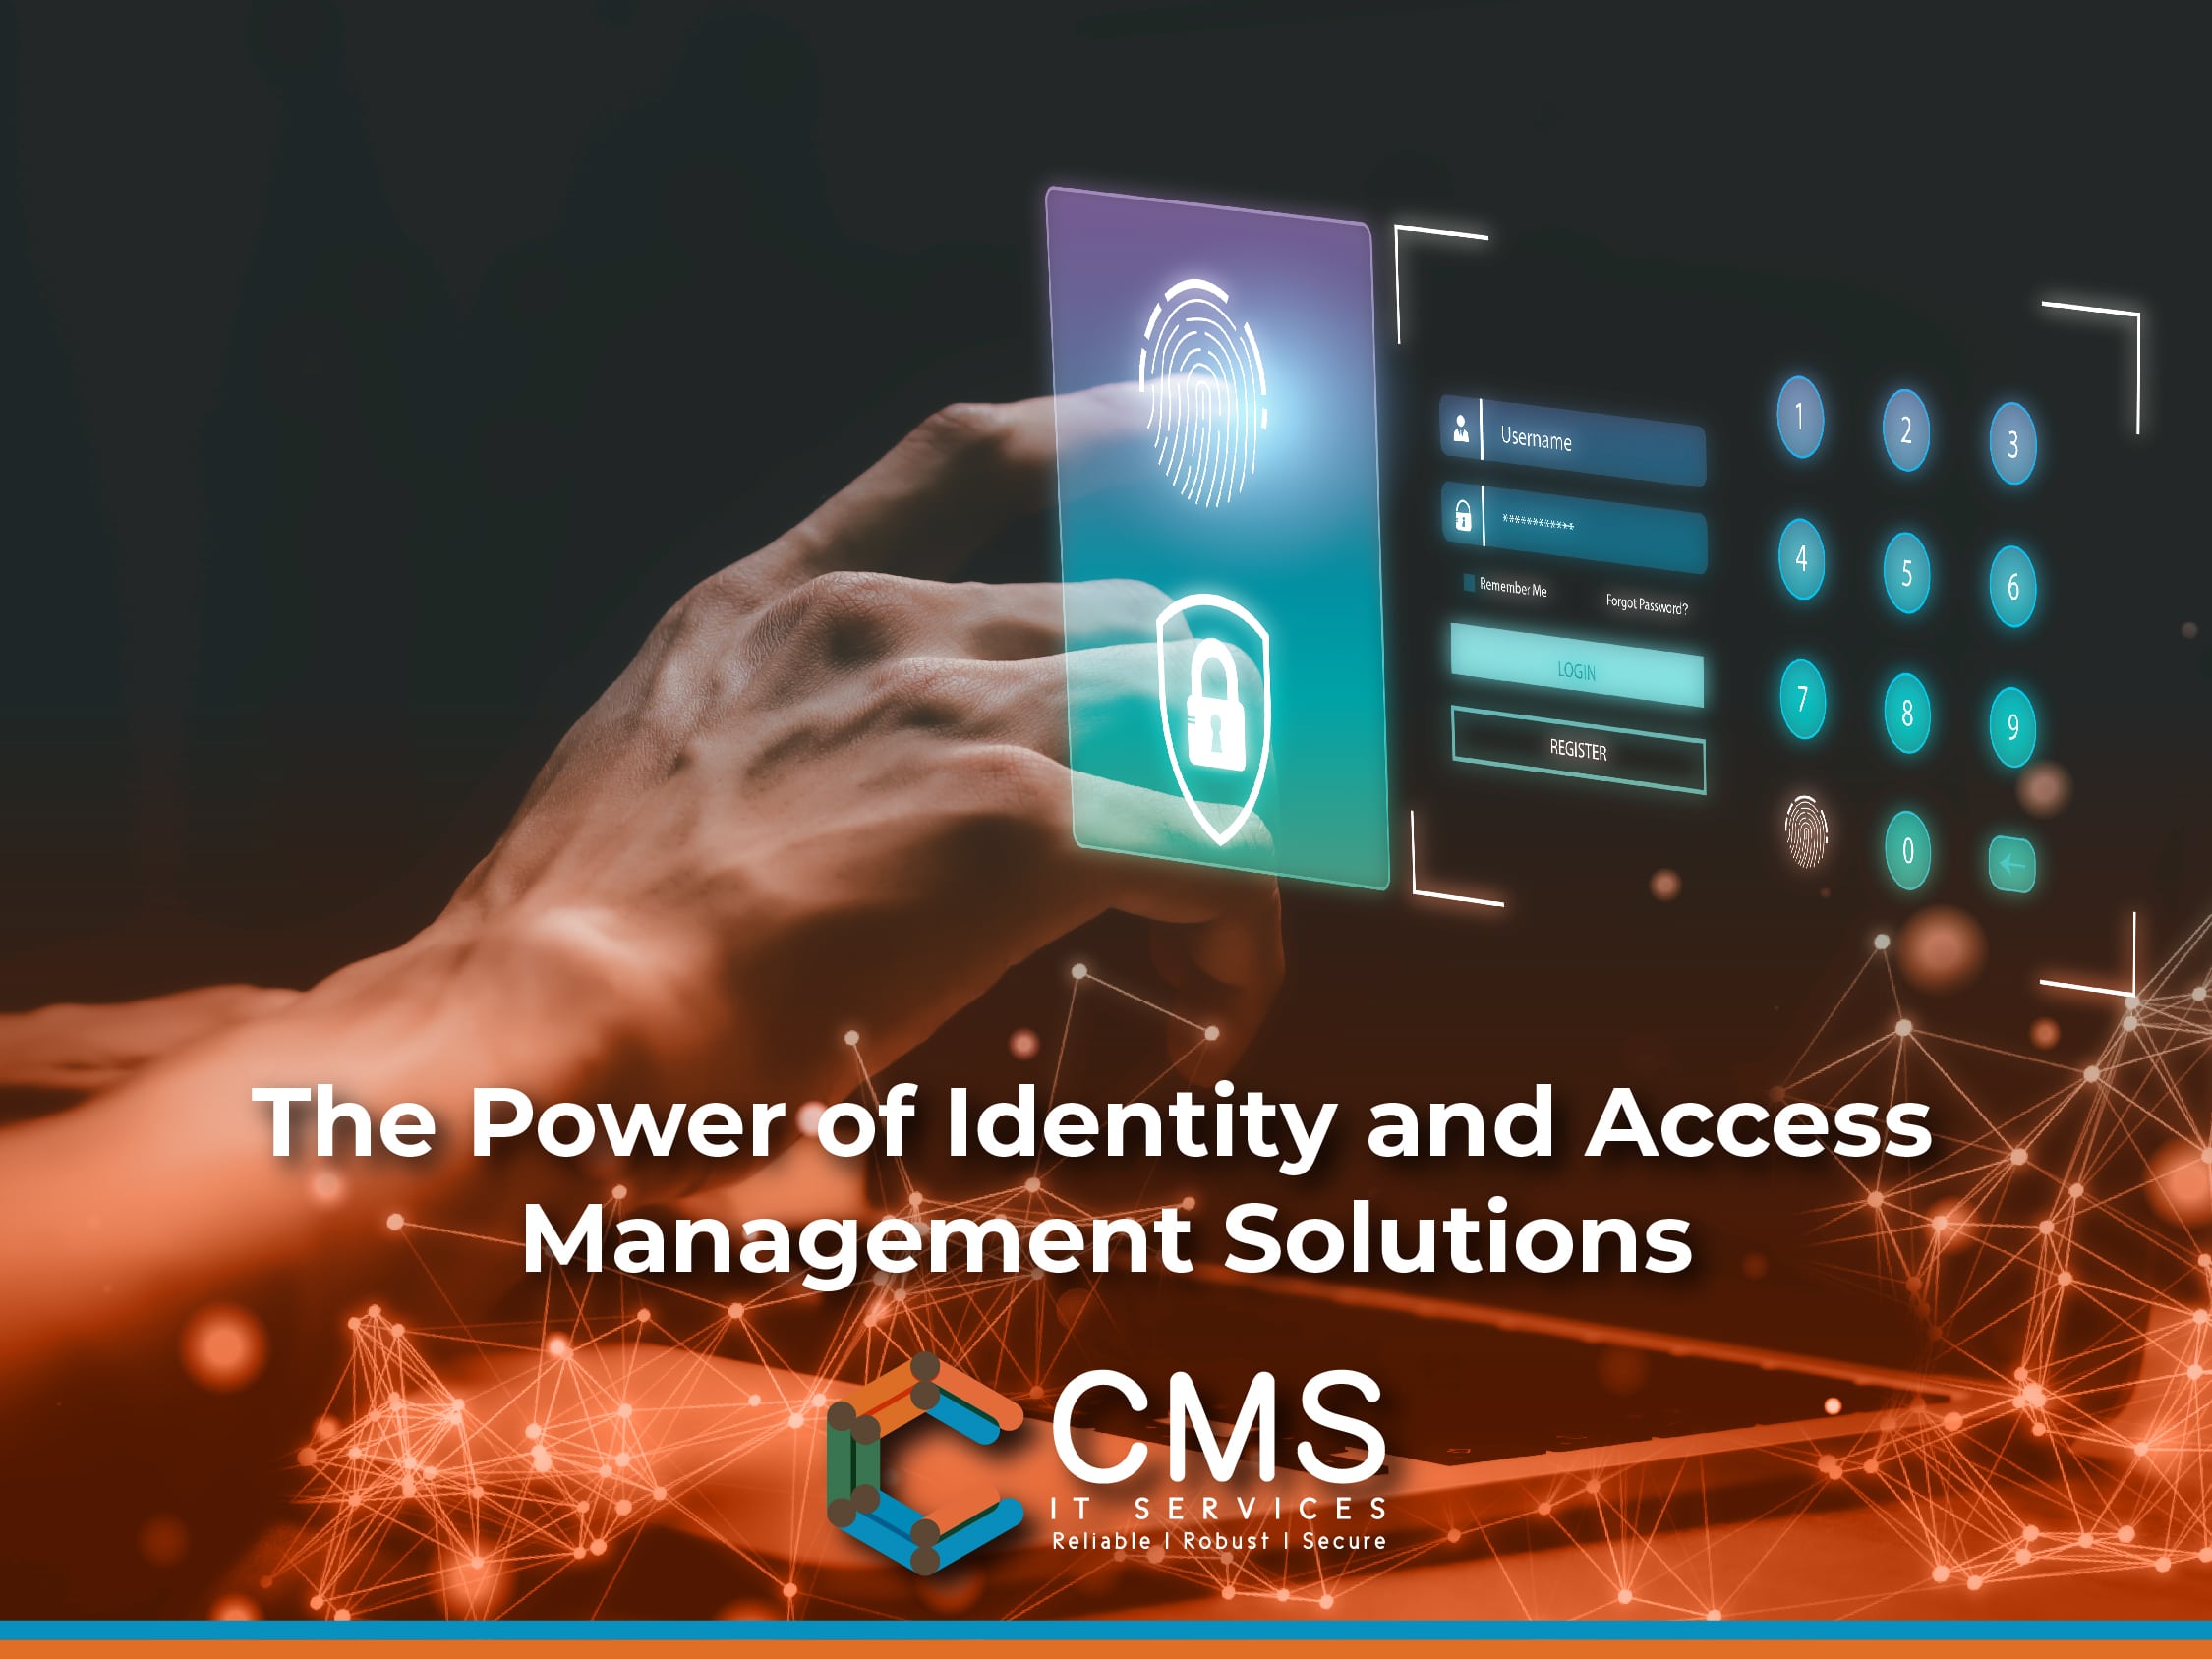 Identity and Access Management solutions